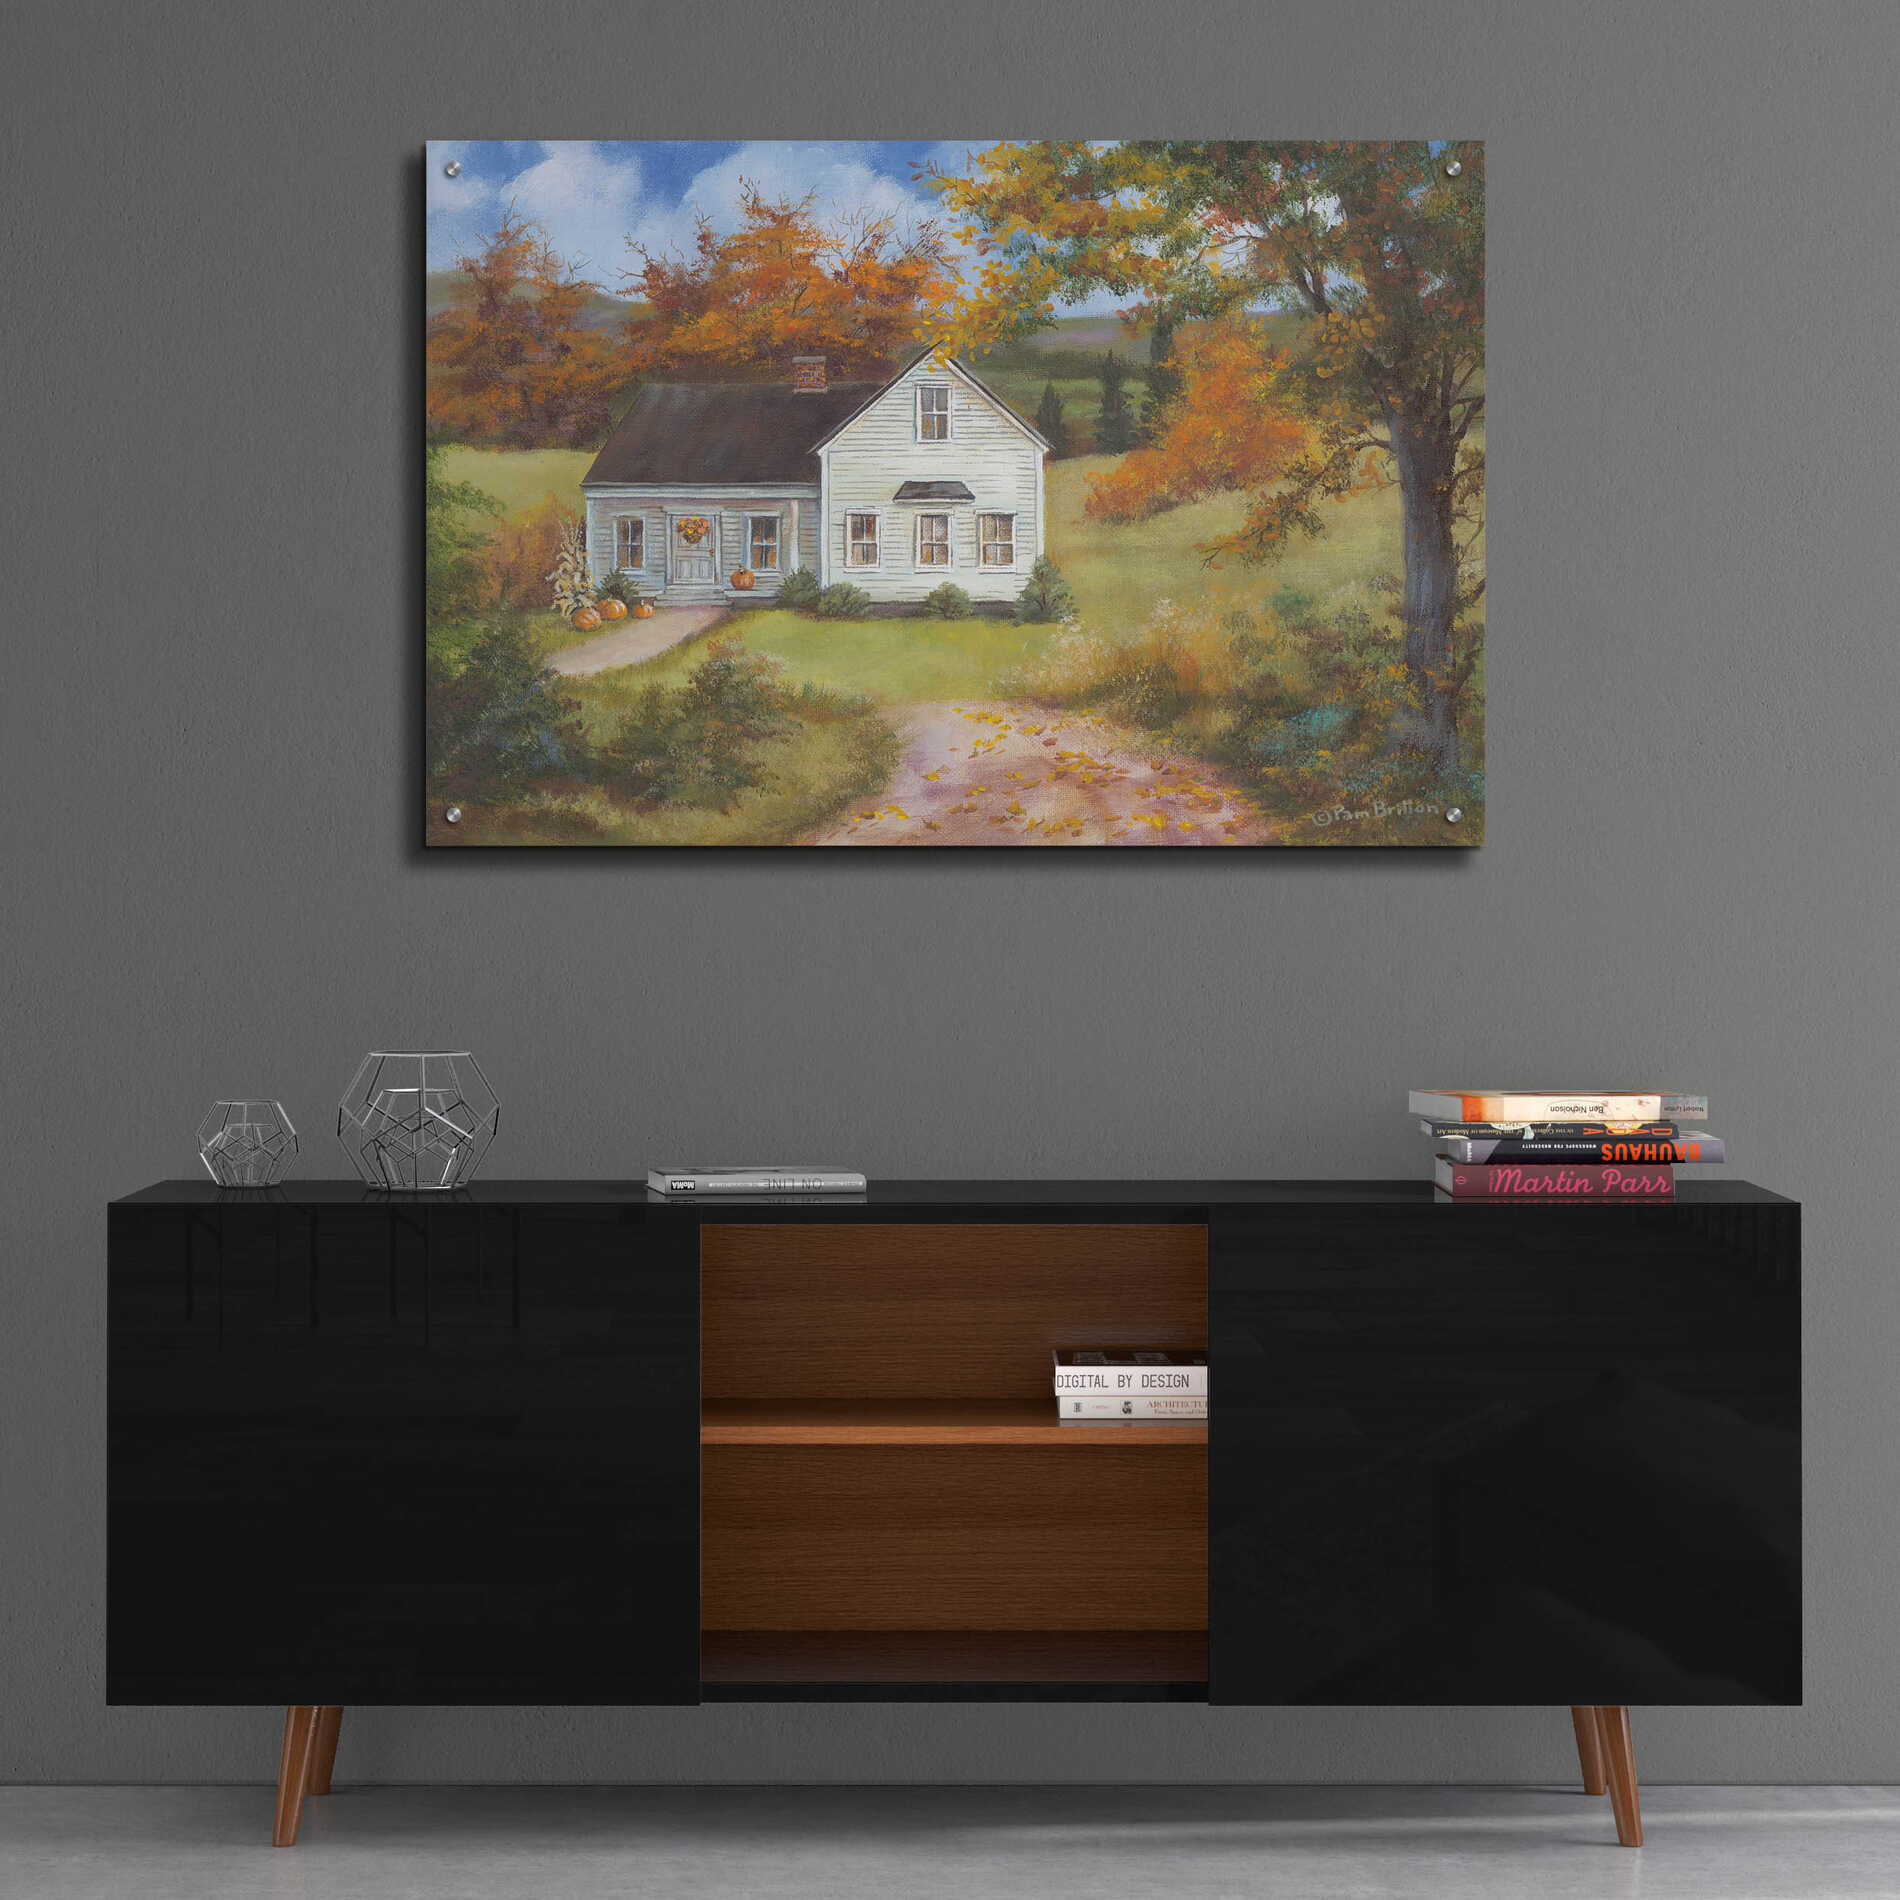 Epic Art 'Fall In The Country' by Pam Britton, Acrylic Glass Wall Art,36x24